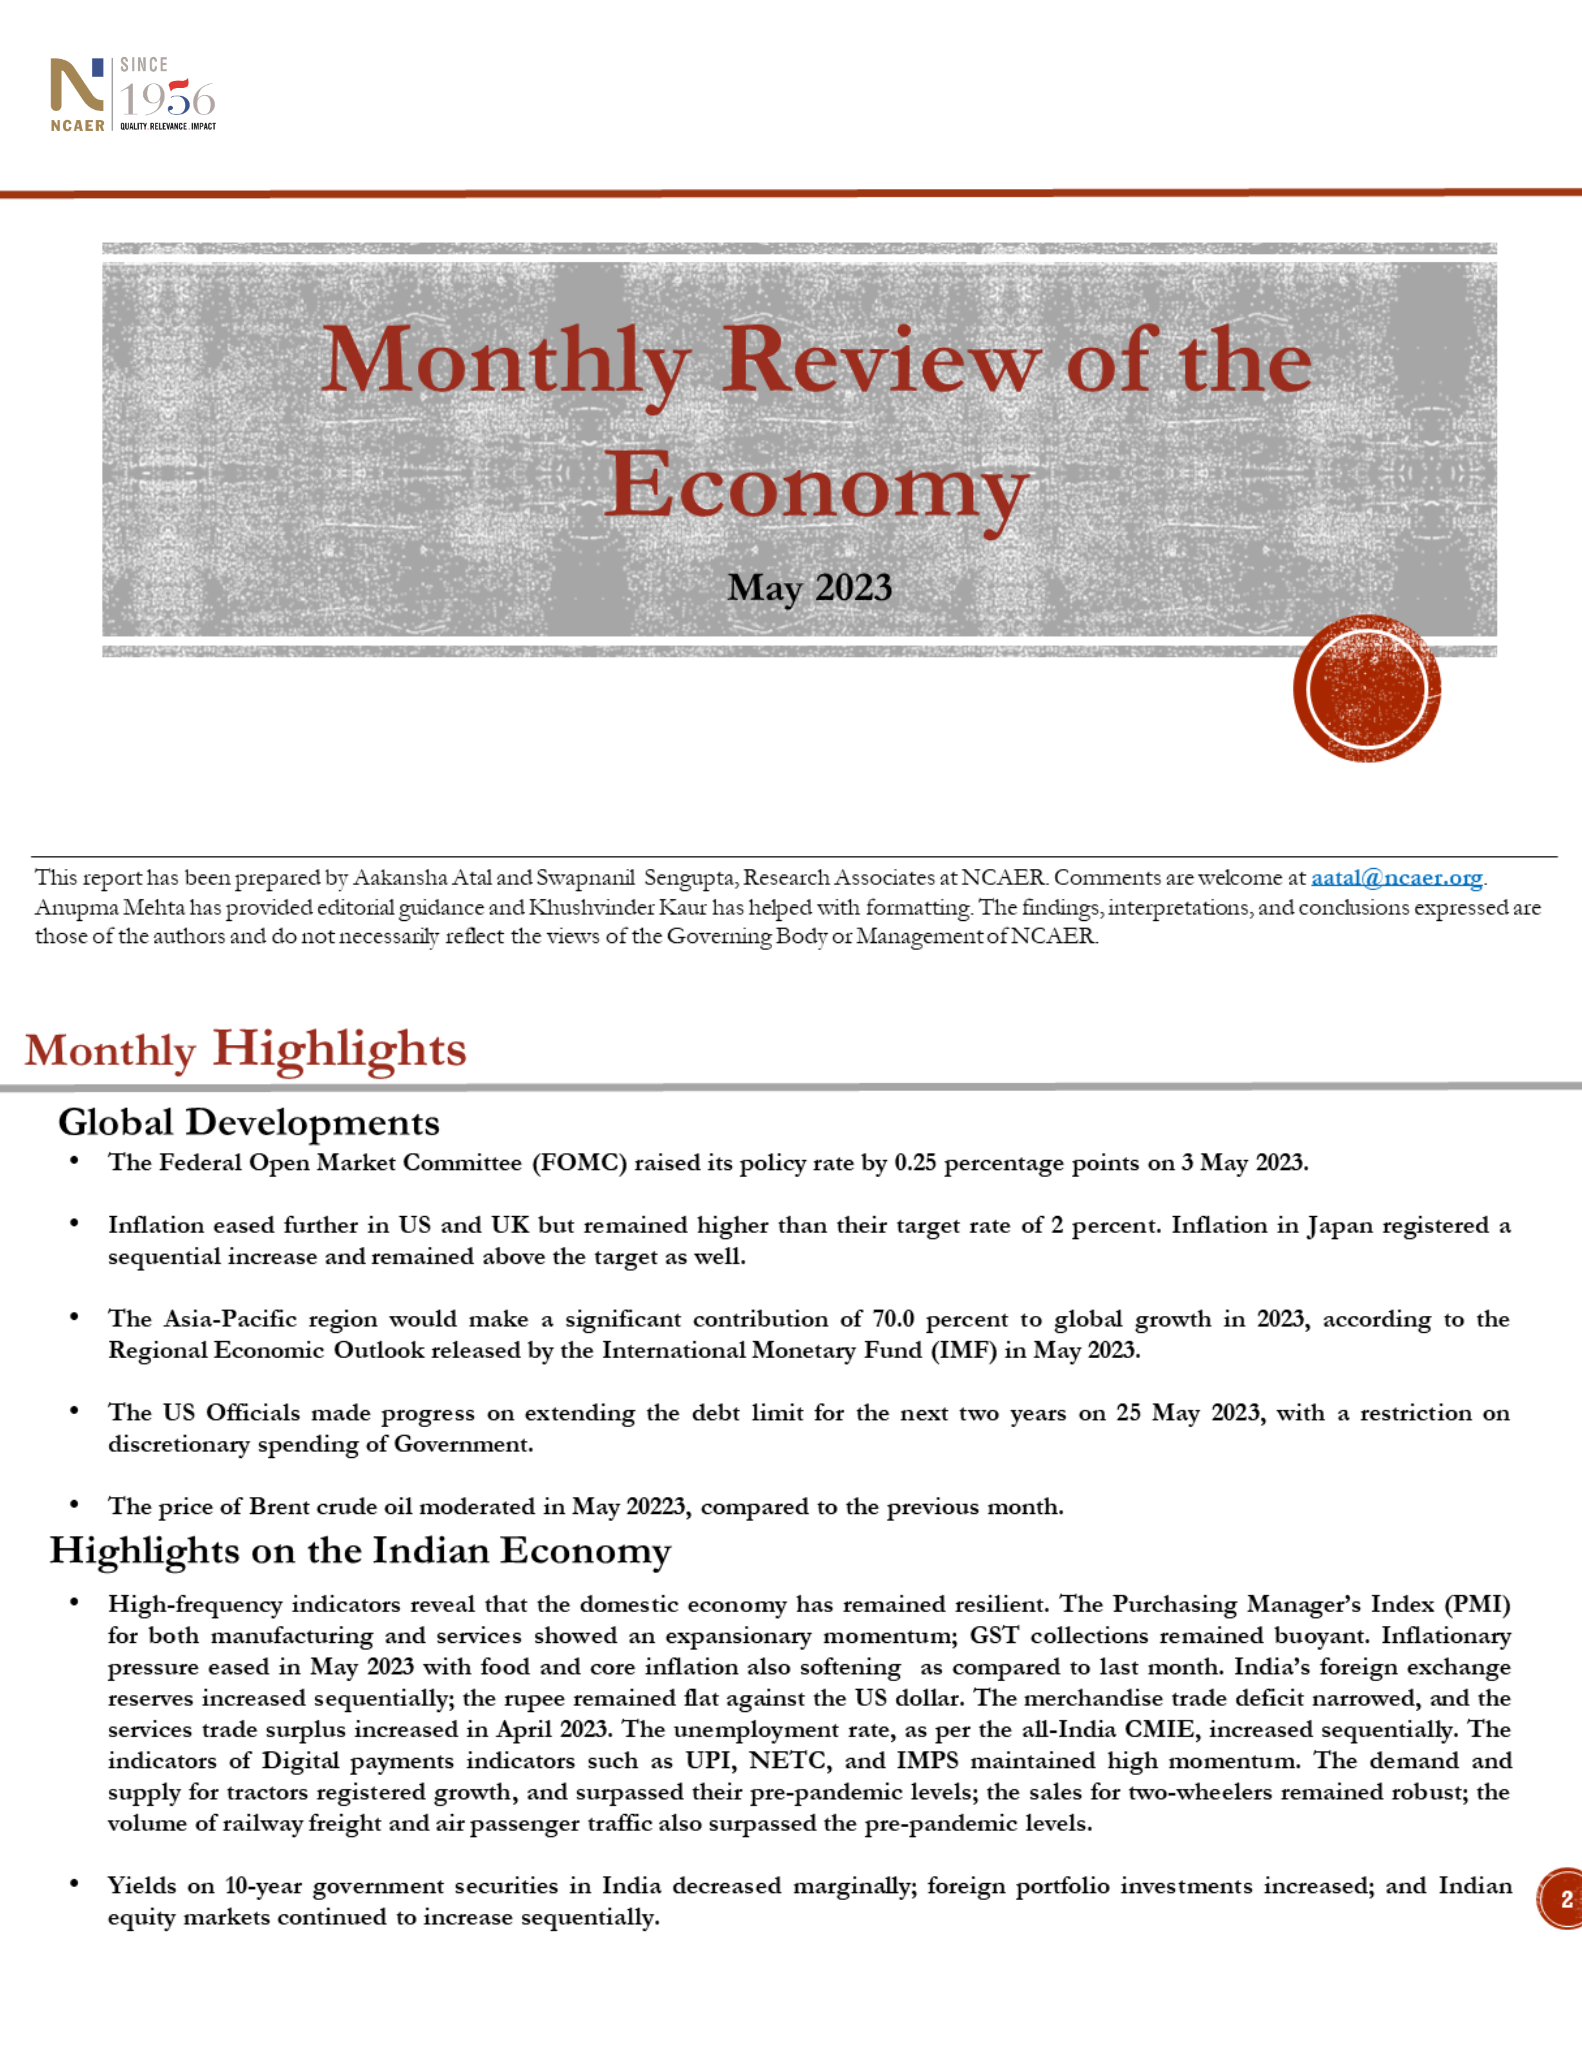 Monthly Review of the Economy: May 2023